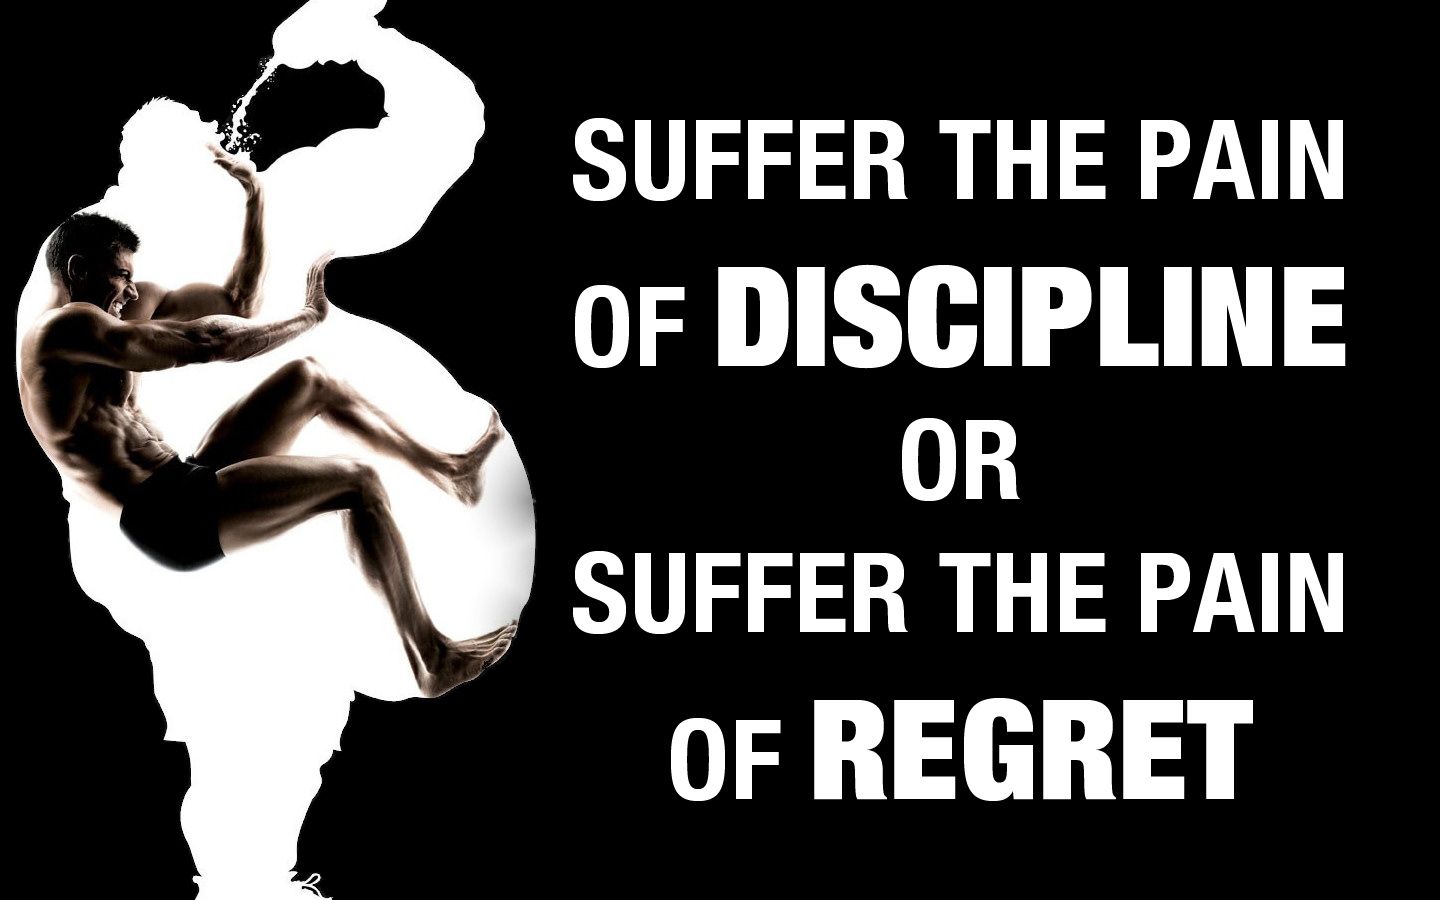 self discipline is all we have in this life!